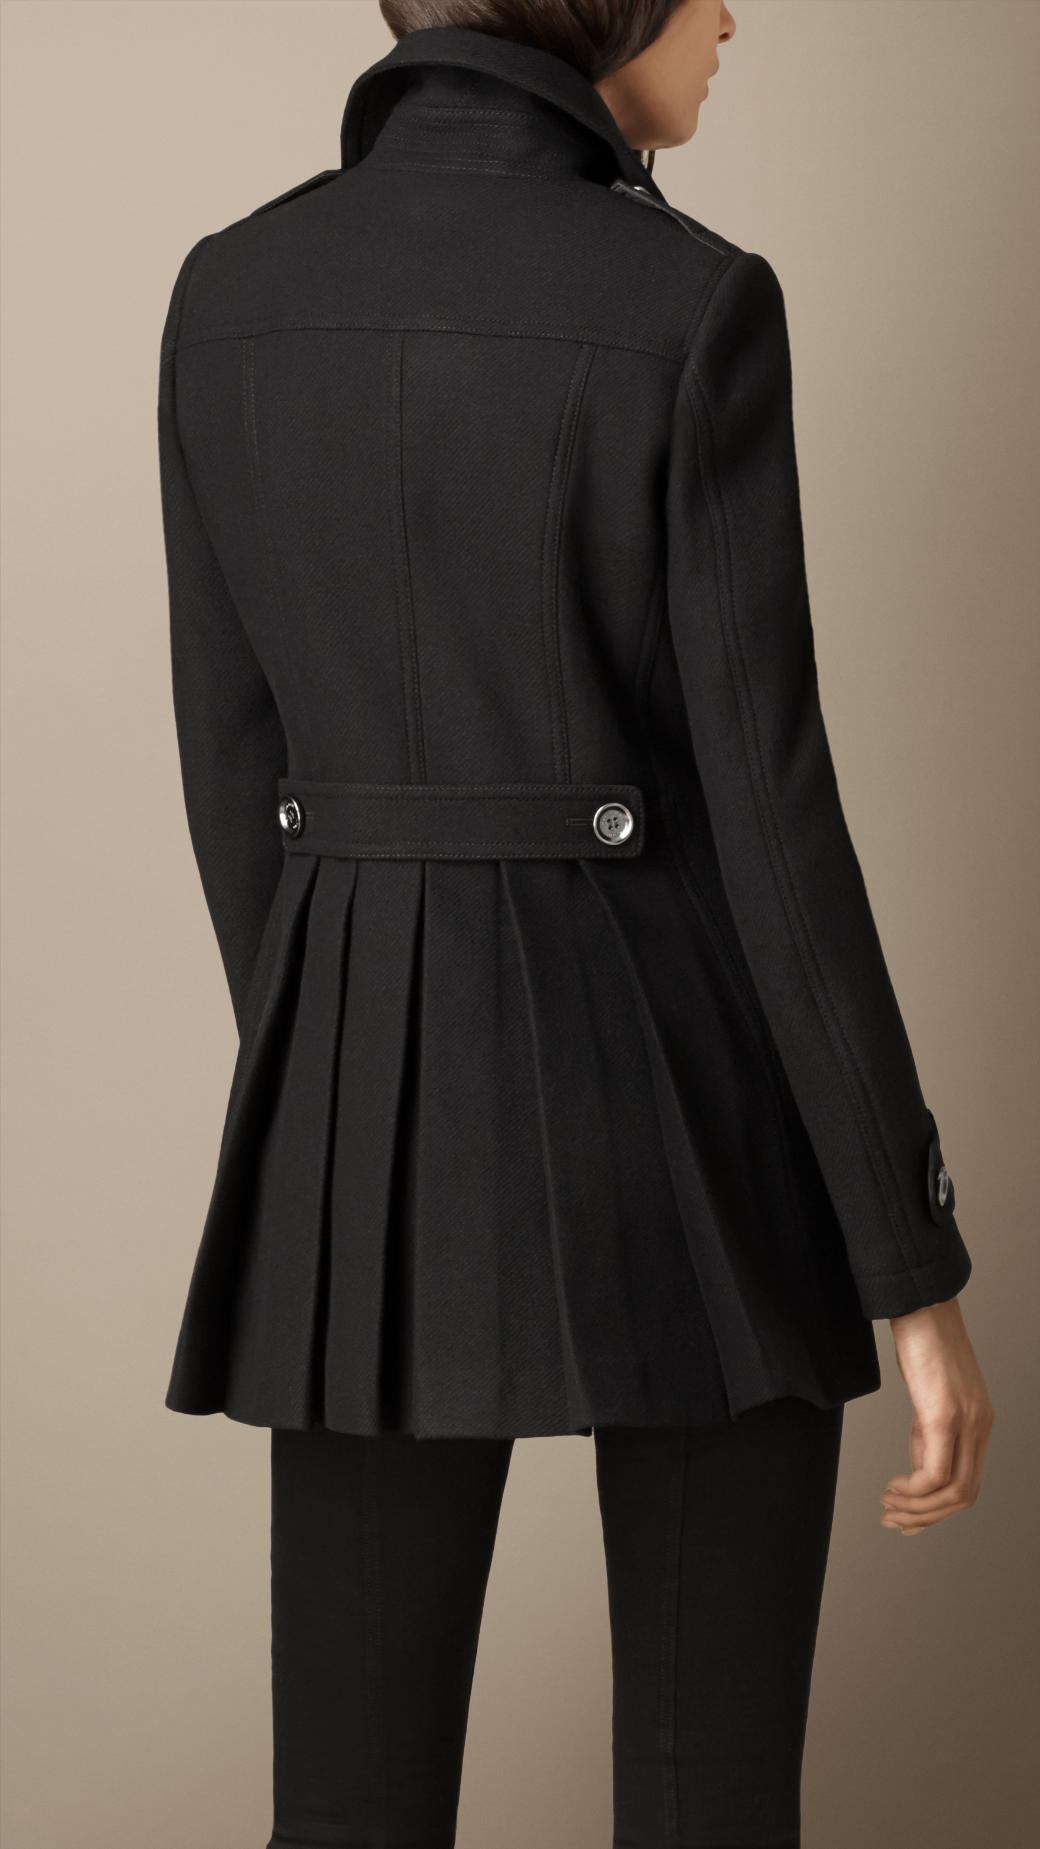 Lyst - Burberry Back Pleat Military Coat in Black